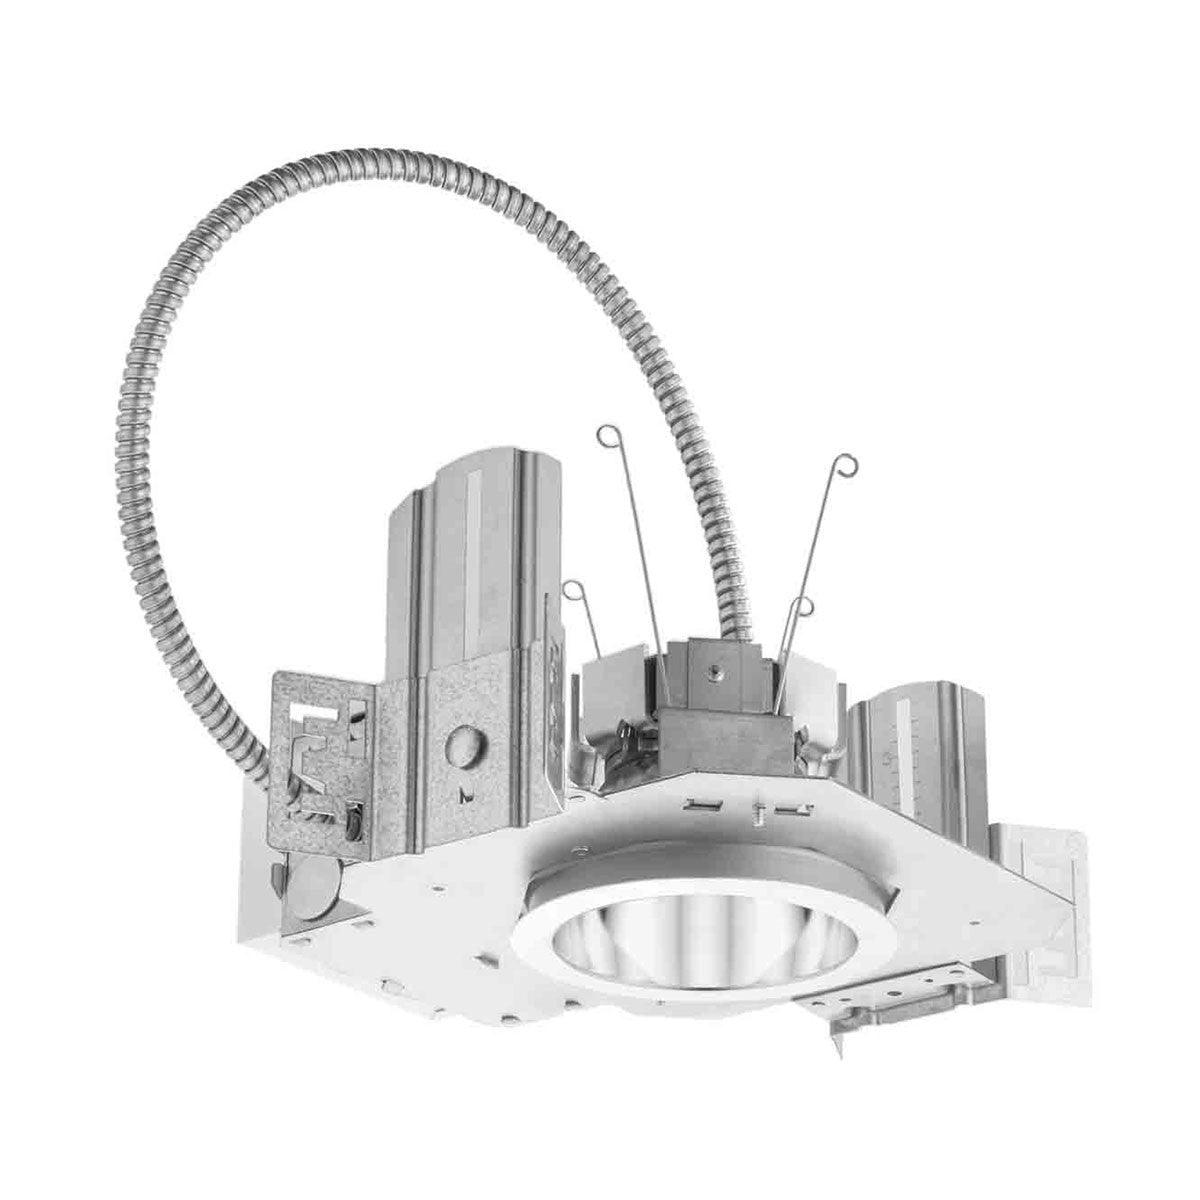 Lithonia LDN4 Commercial LED Recessed Downlight, 1500 lumens, 3500K (Reflector Sold Separately) - Bees Lighting